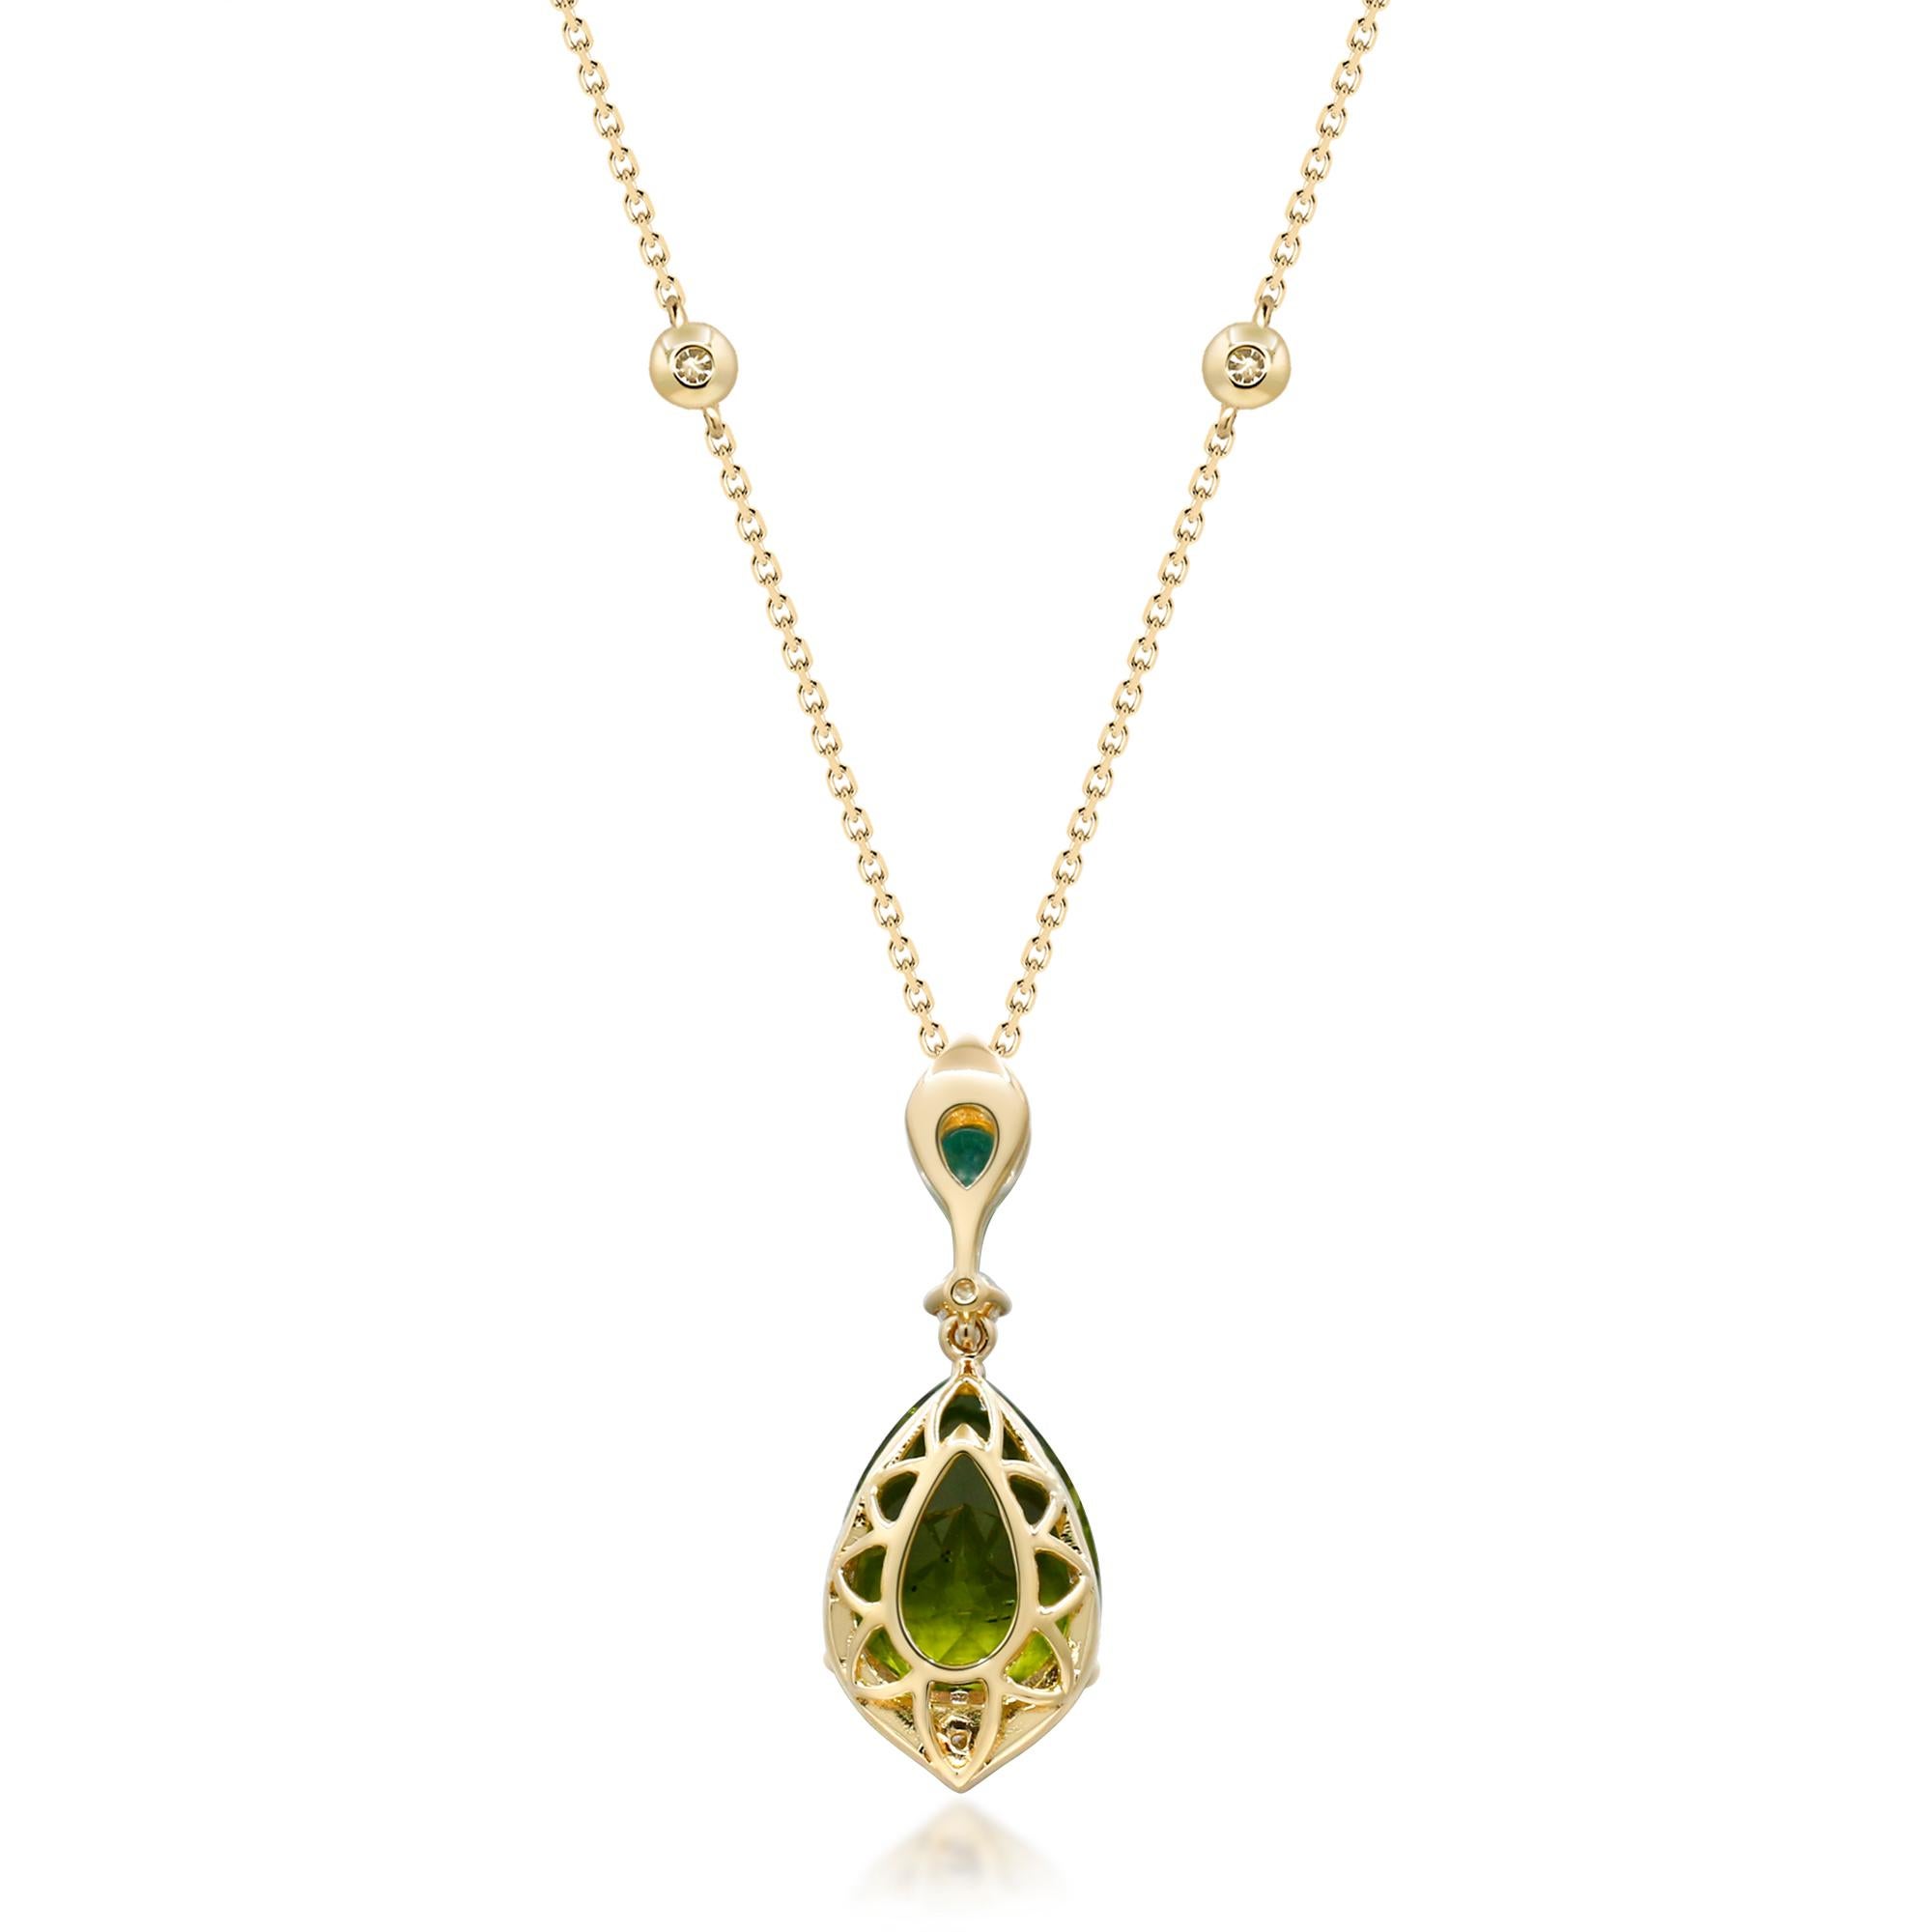 Decorate yourself in elegance with this Pendant is crafted from 14-karat Yellow Gold by Gin & Grace. This Pendant is made up of Pear-cut Peridot (1 pcs) 3.93 carat ,3*4 Pear-cut Emerald (1 pcs) 0.14 carat and round-cut White Diamond (11 Pcs) 0.13